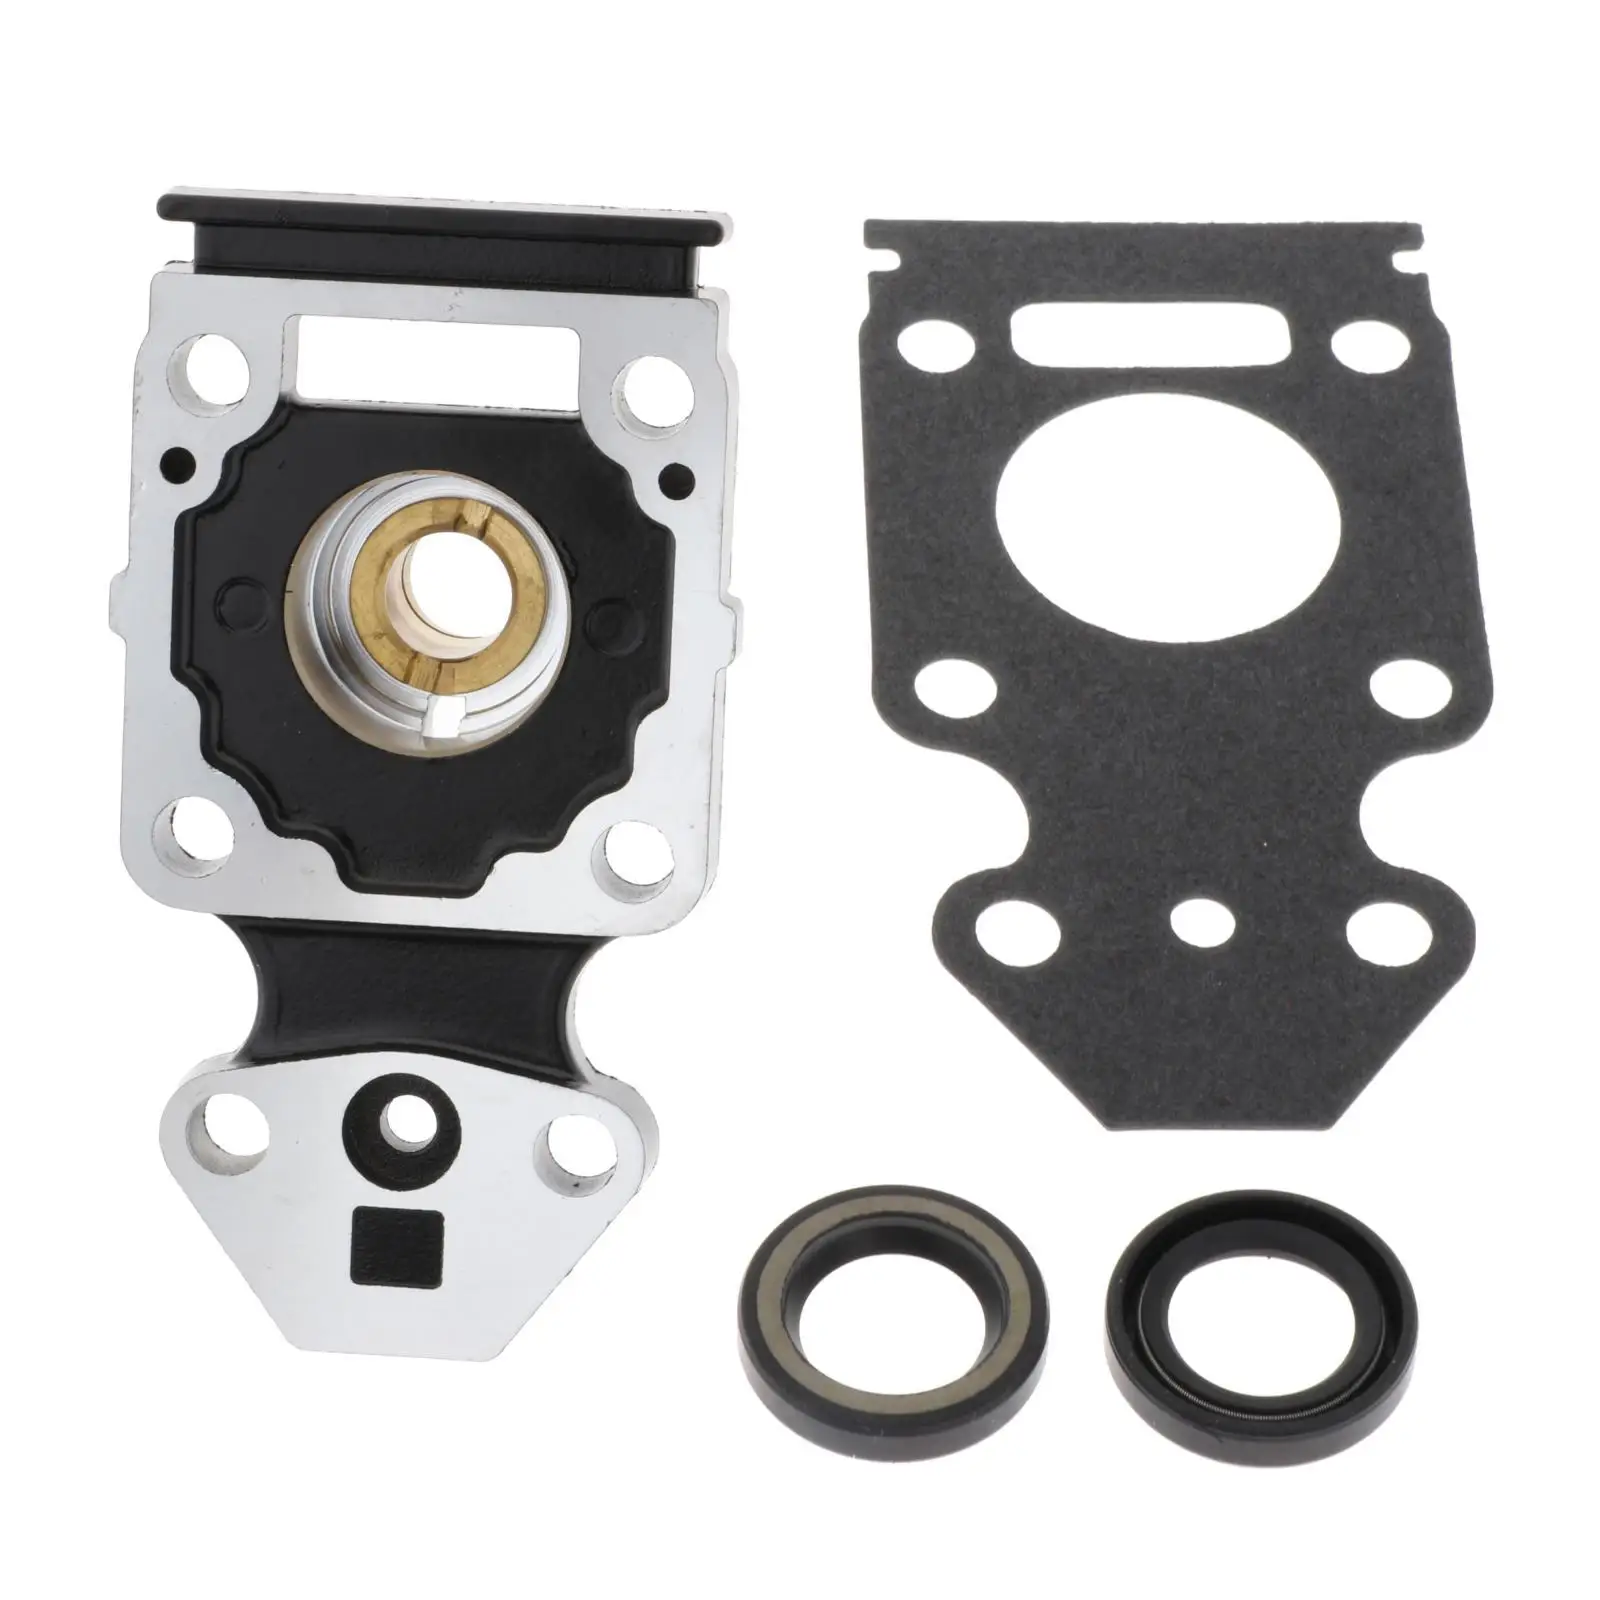 Housing Kit, with Oil Seal & Bush Boat Motor # 63V-45331-00-50001  Outboard 9.HP, for  Replacement.